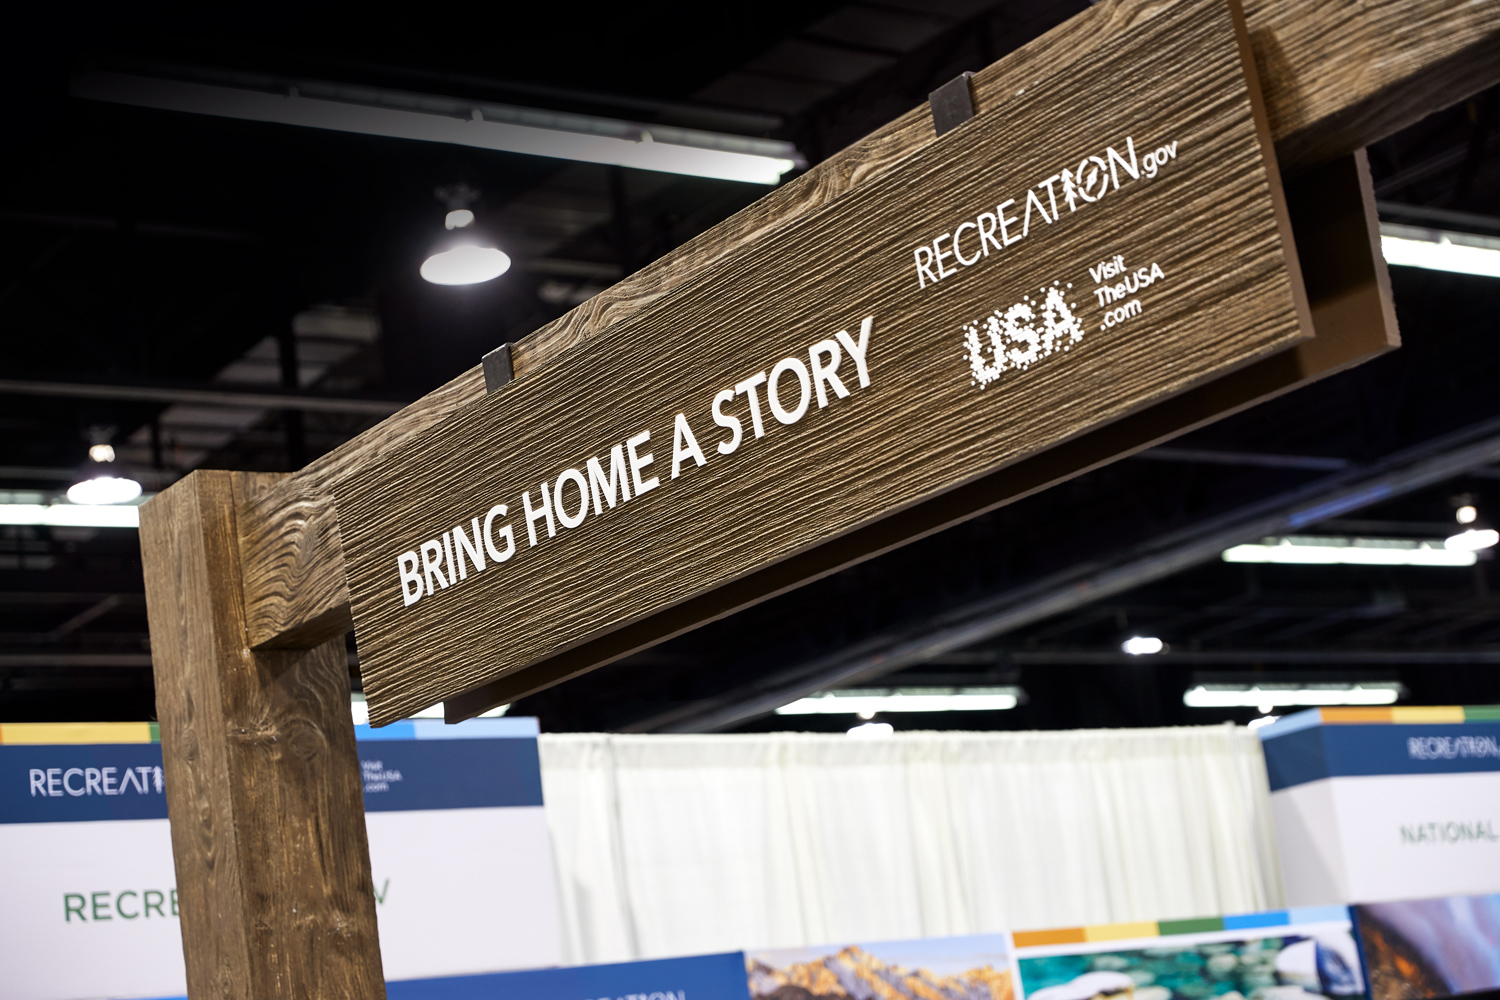 Image of Bring Home a Story sign